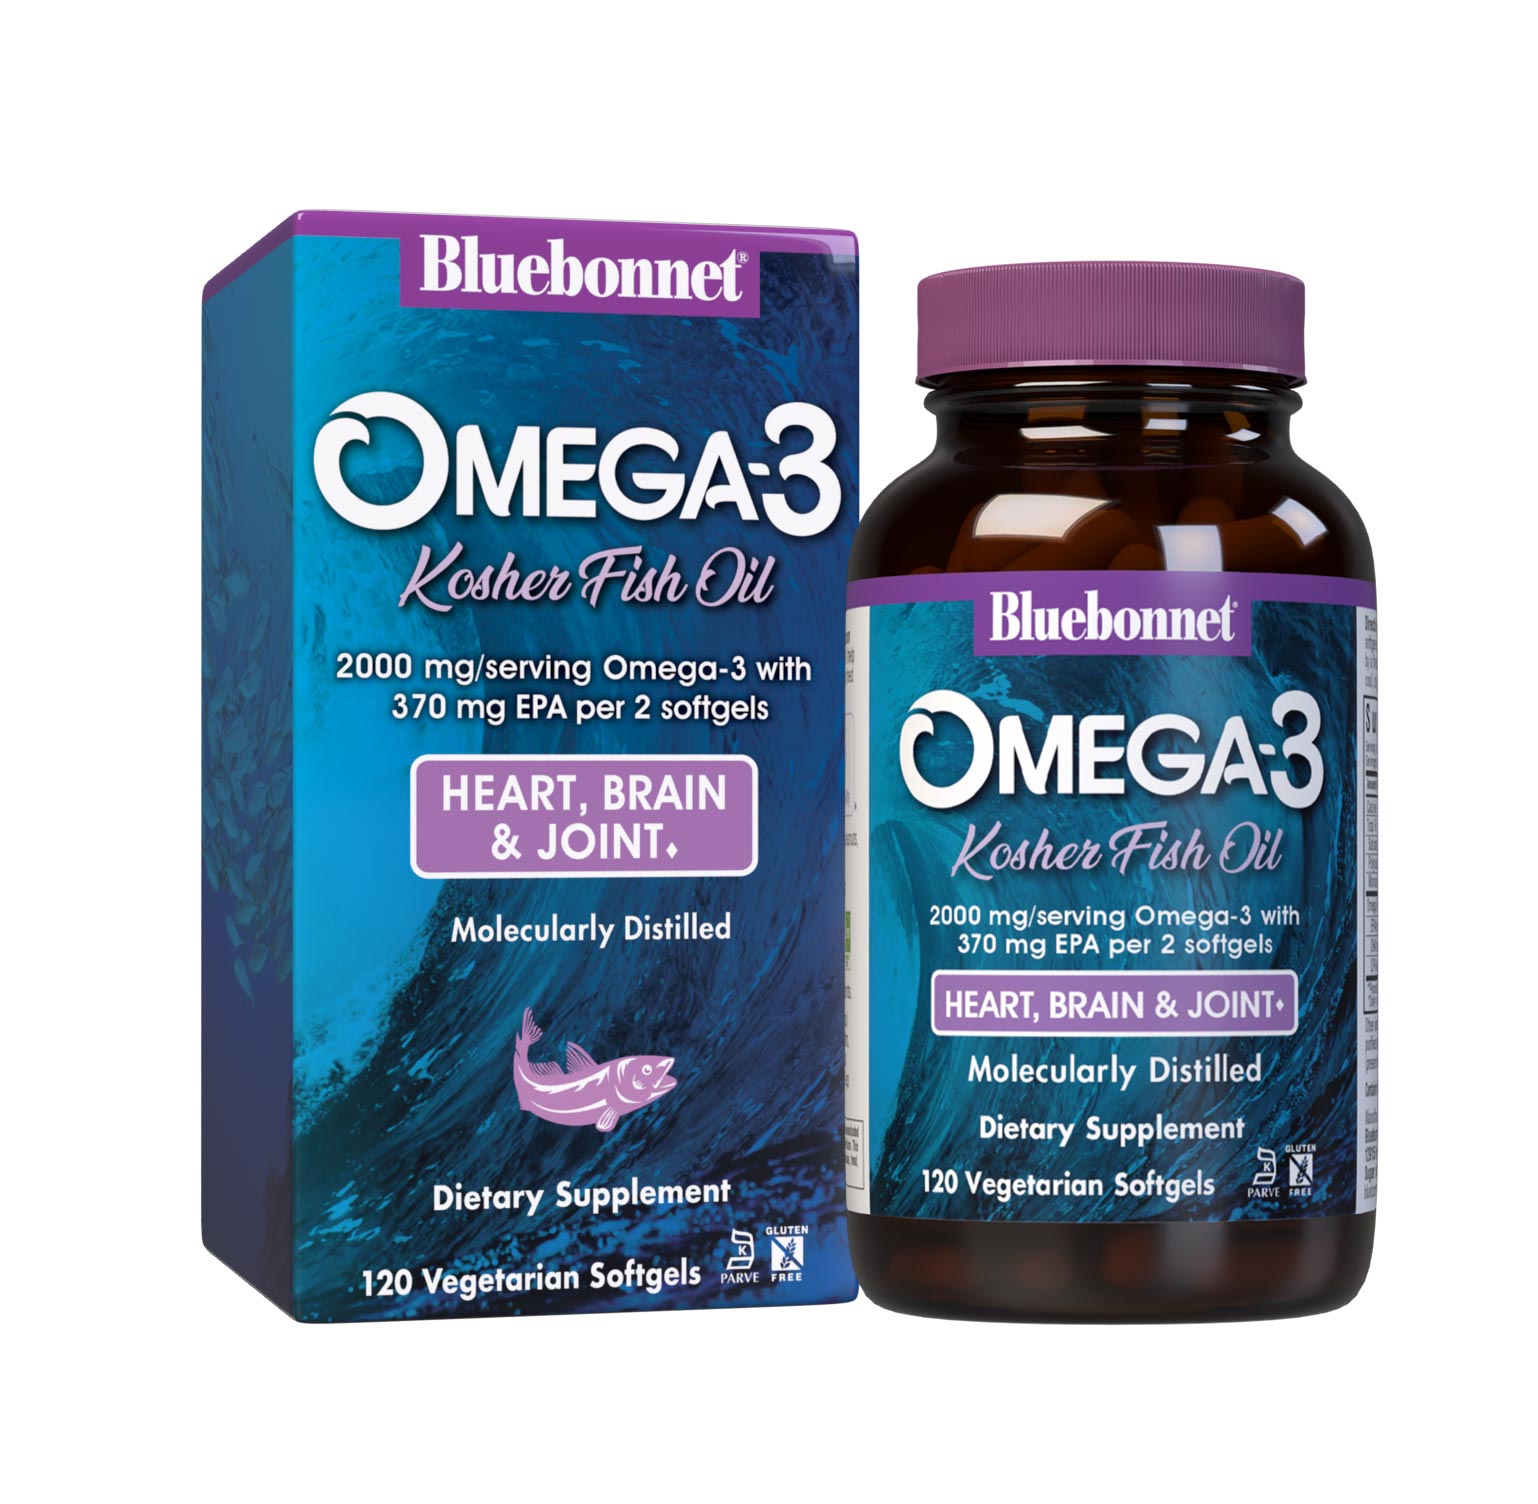 Omega-3 Kosher Fish Oil 120 Vegetarian Softgels are formulated with EPA, DHA and DPA to help support heart, brain and joint health by utilizing refined omega-3s from wild ocean fish. Packaging #size_120 count